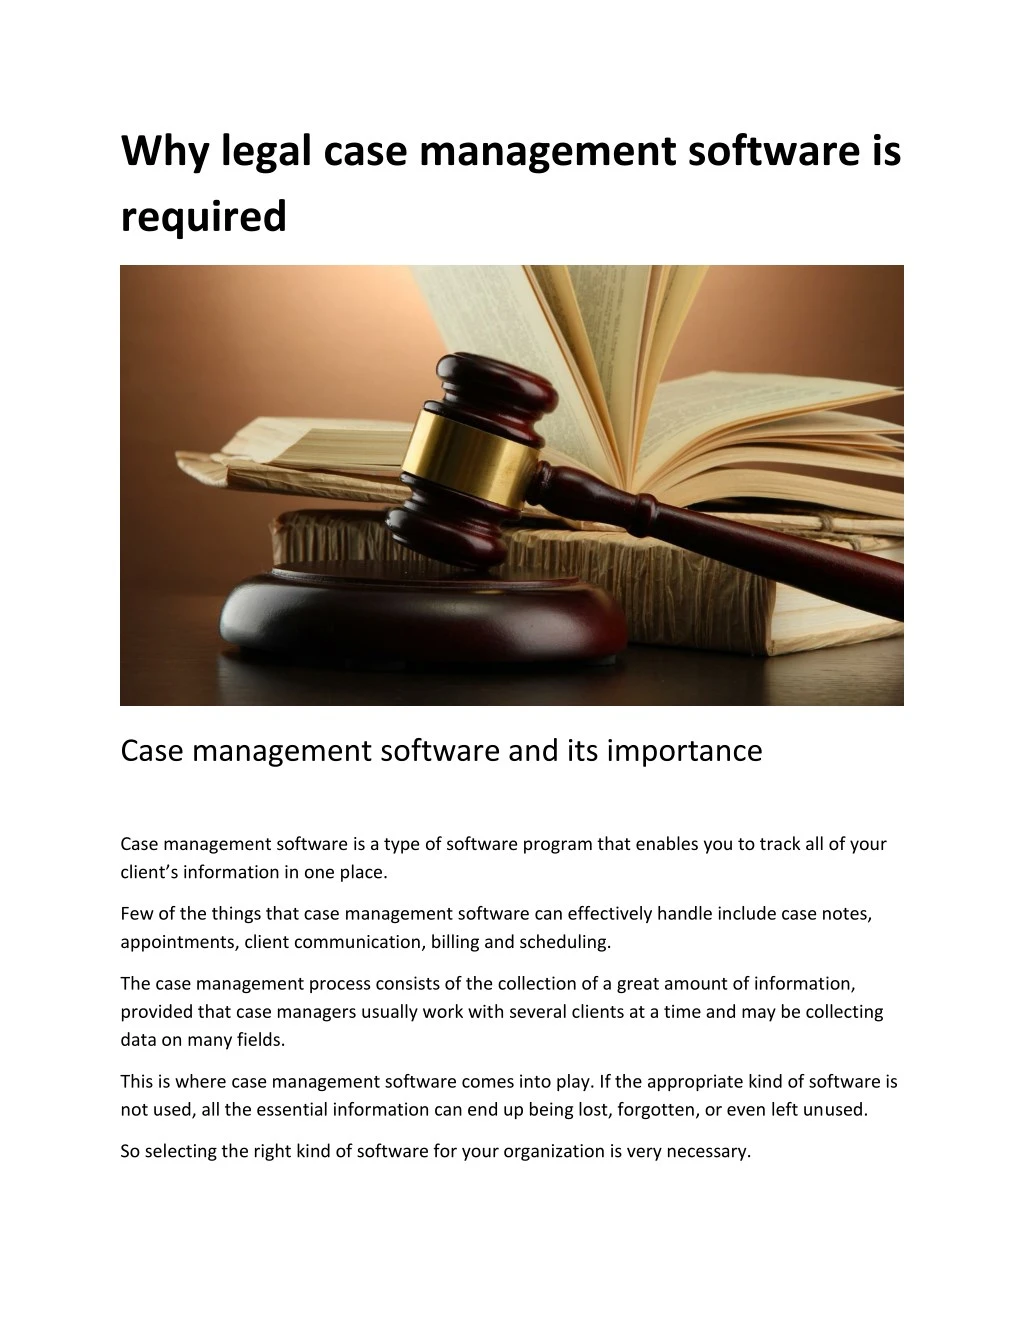 why legal case management software is required